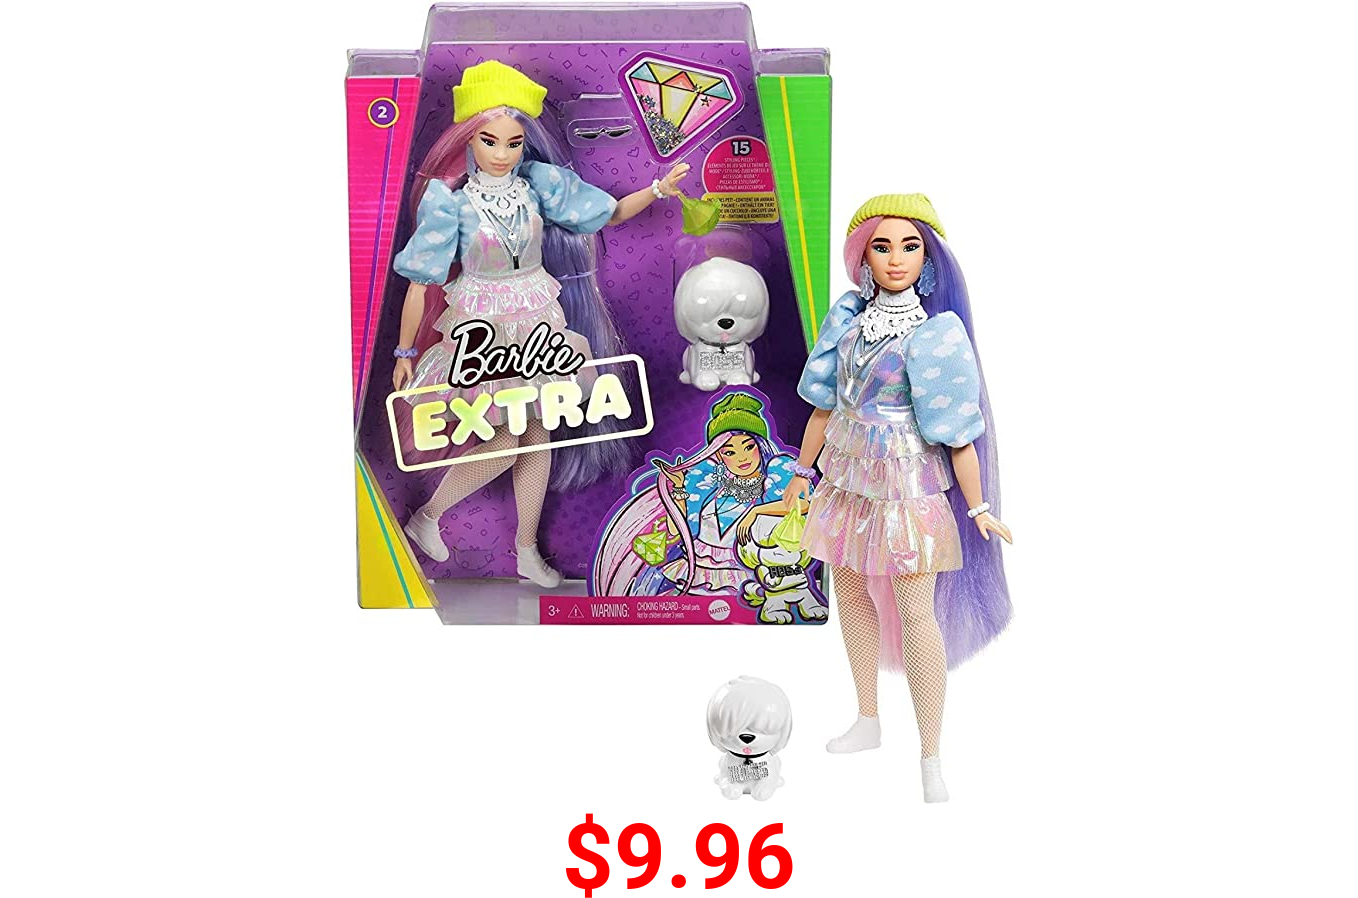 Barbie Extra Doll #2 in Shimmery Look with Pet Puppy, Pink & Purple Fantasy Hair, Layered Outfit & Accessories Including Neon Beanie, Multiple Flexible Joints, Gift for Kids 3 Years Old & Up , White